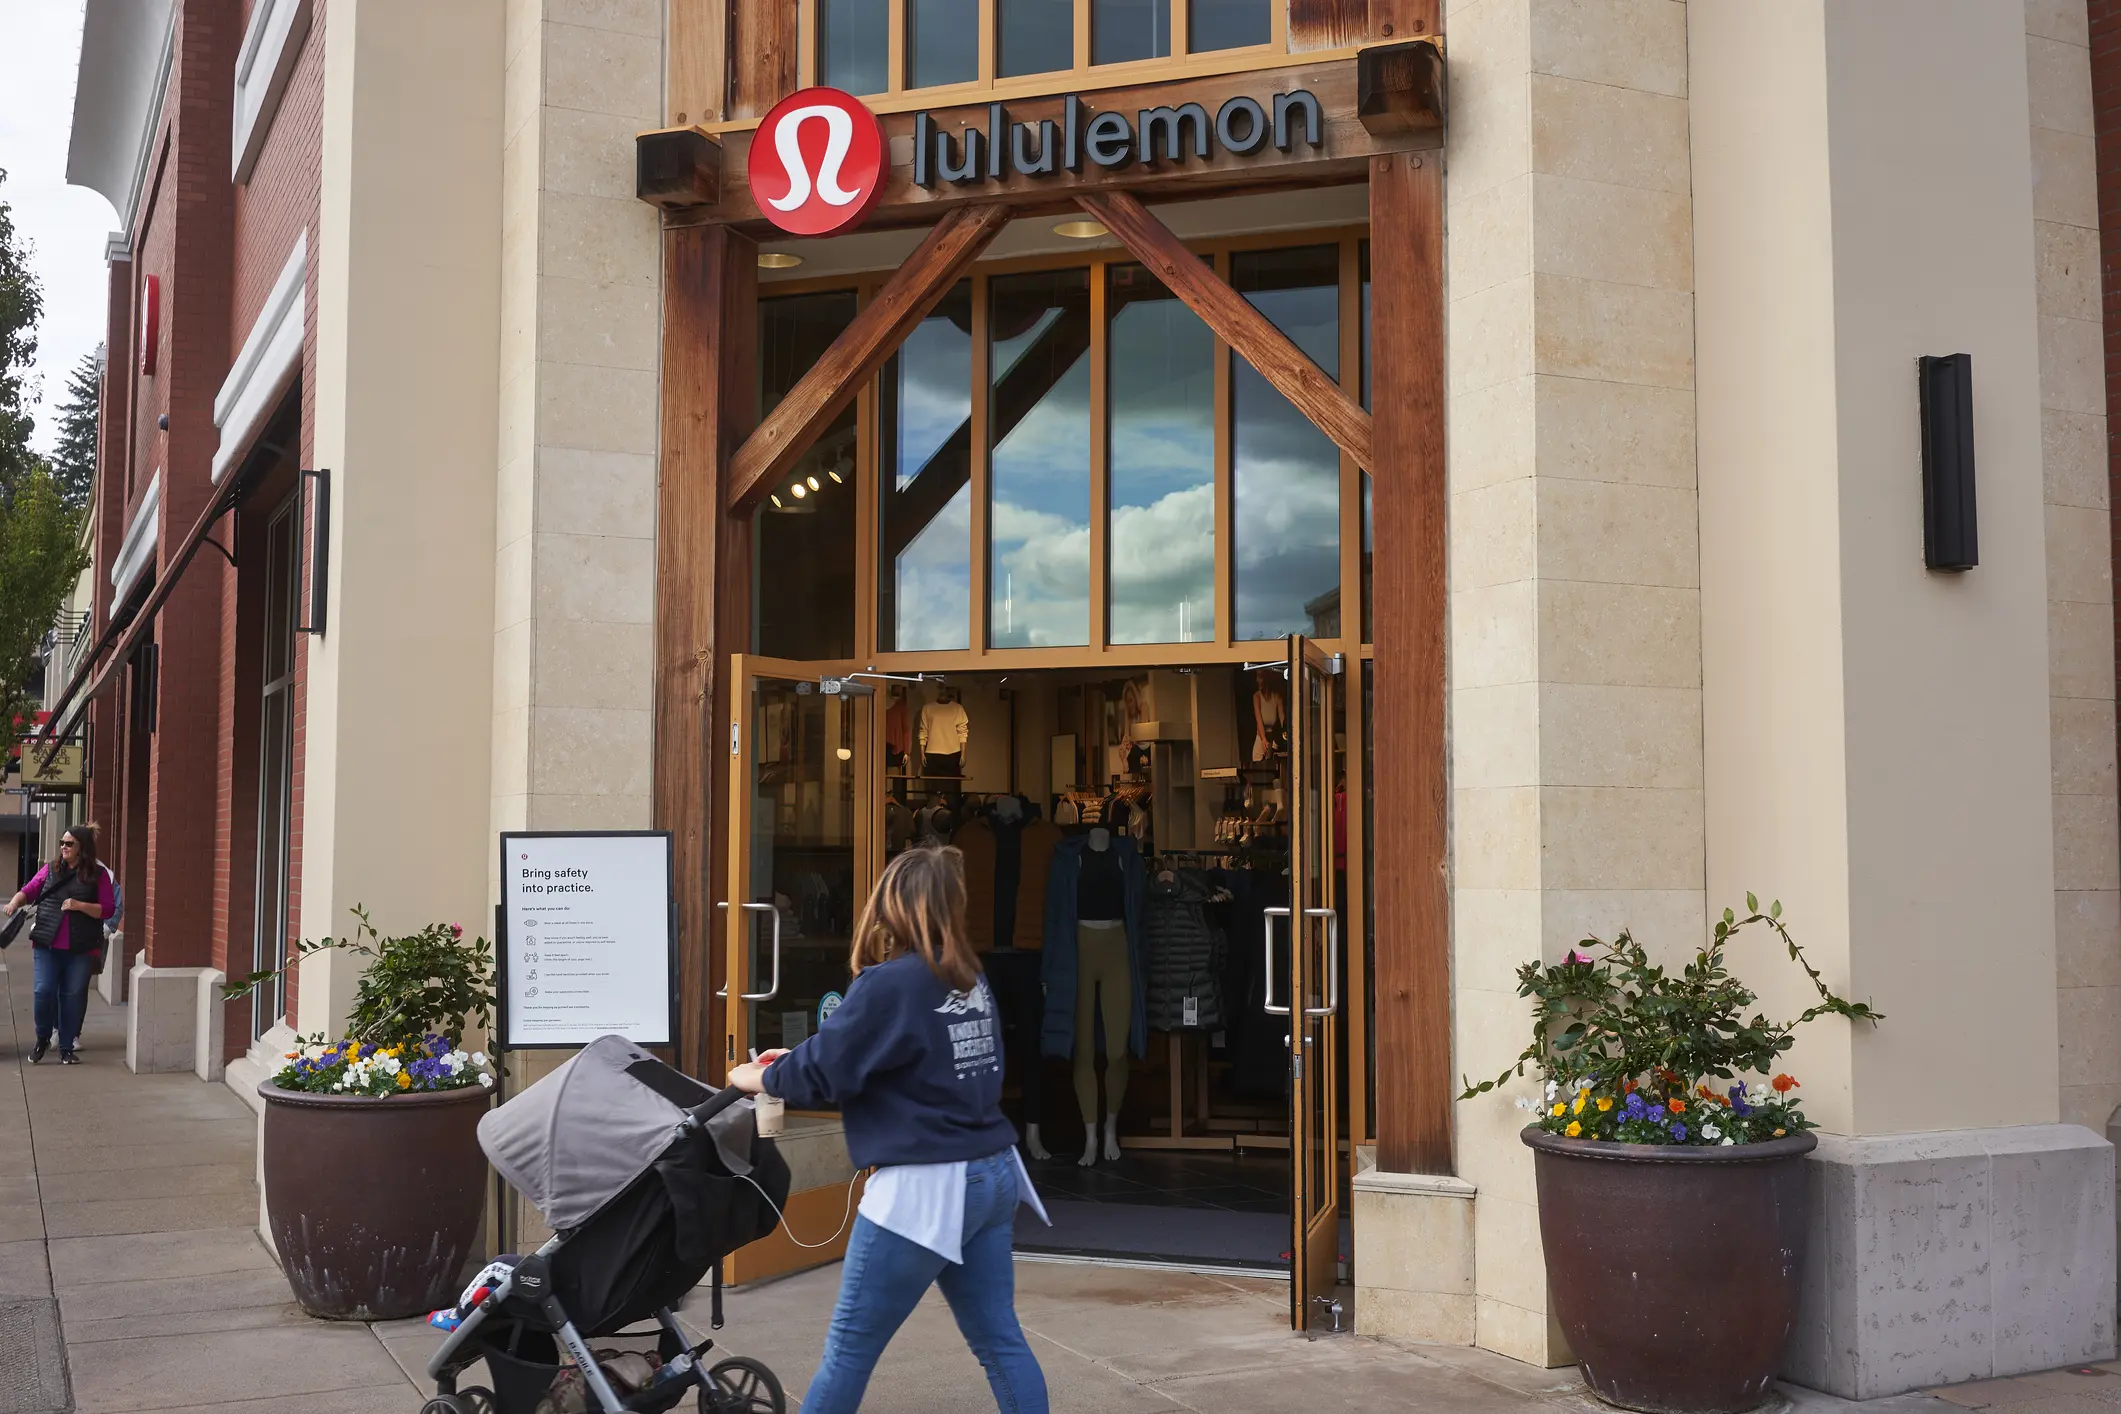 Lululemon To Test Resale Program, Unveil Collection Featuring Dyes